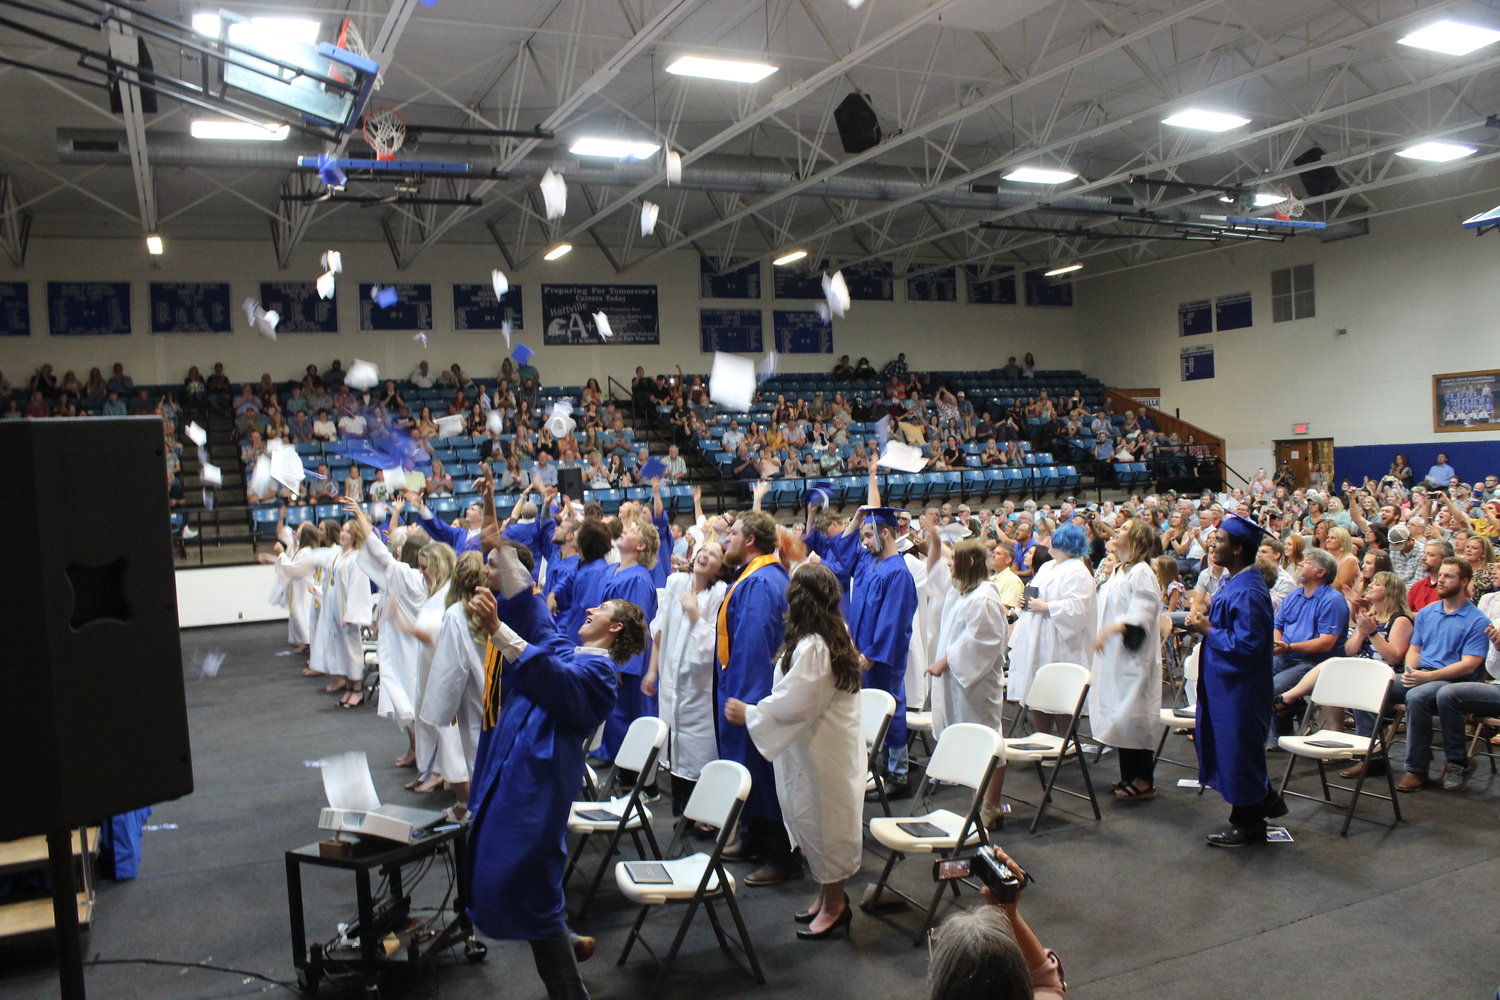 Class of 2020 Hartville graduates throw their caps in the air to celebrate.